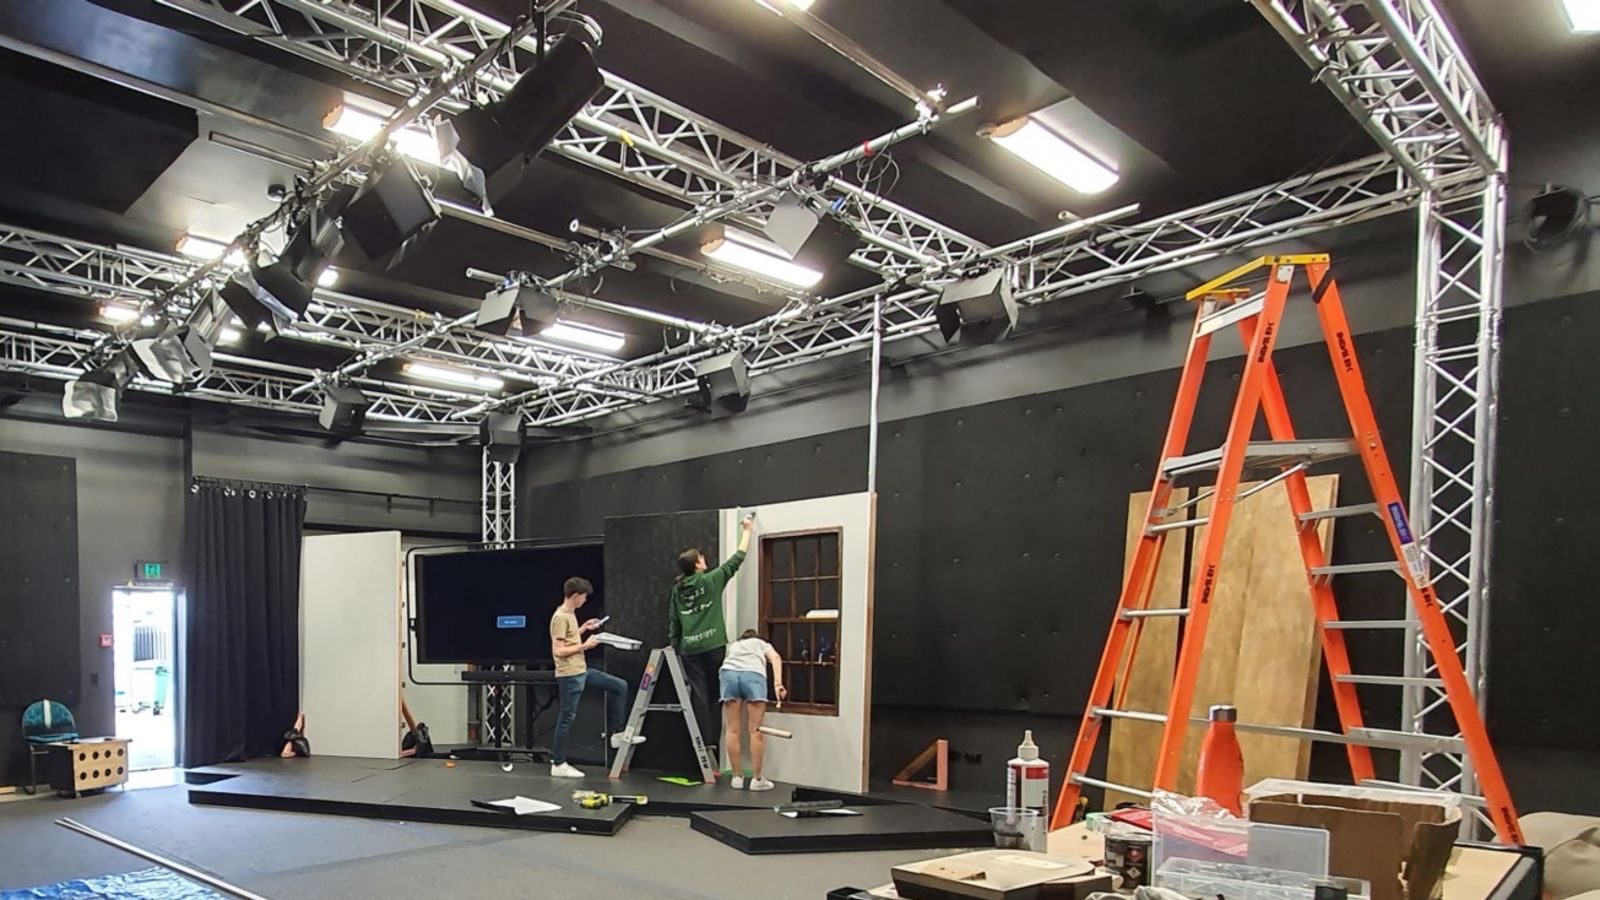 3 people paint and work on a set build in a large studio